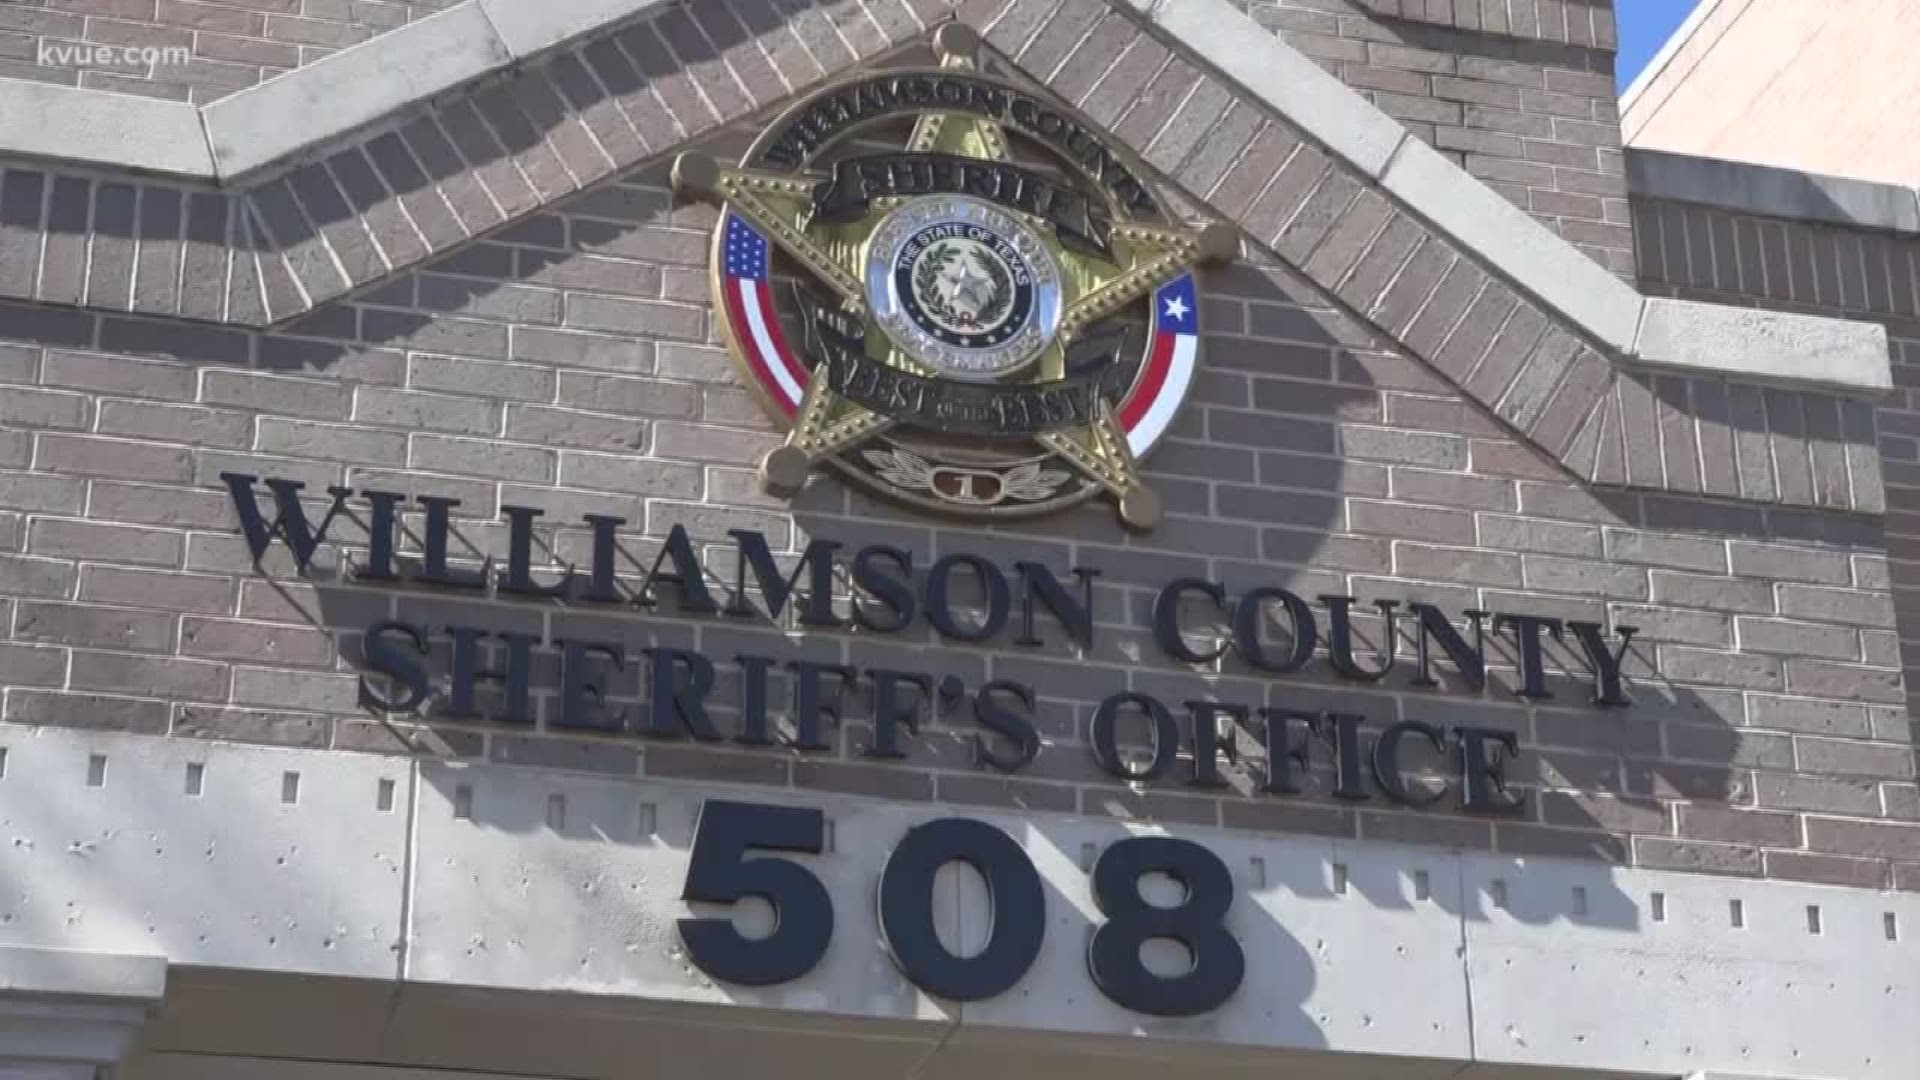 The Williamson County Sheriff's Office is one step closer to tracking down an attempted car burglar who was caught in the act Monday morning.